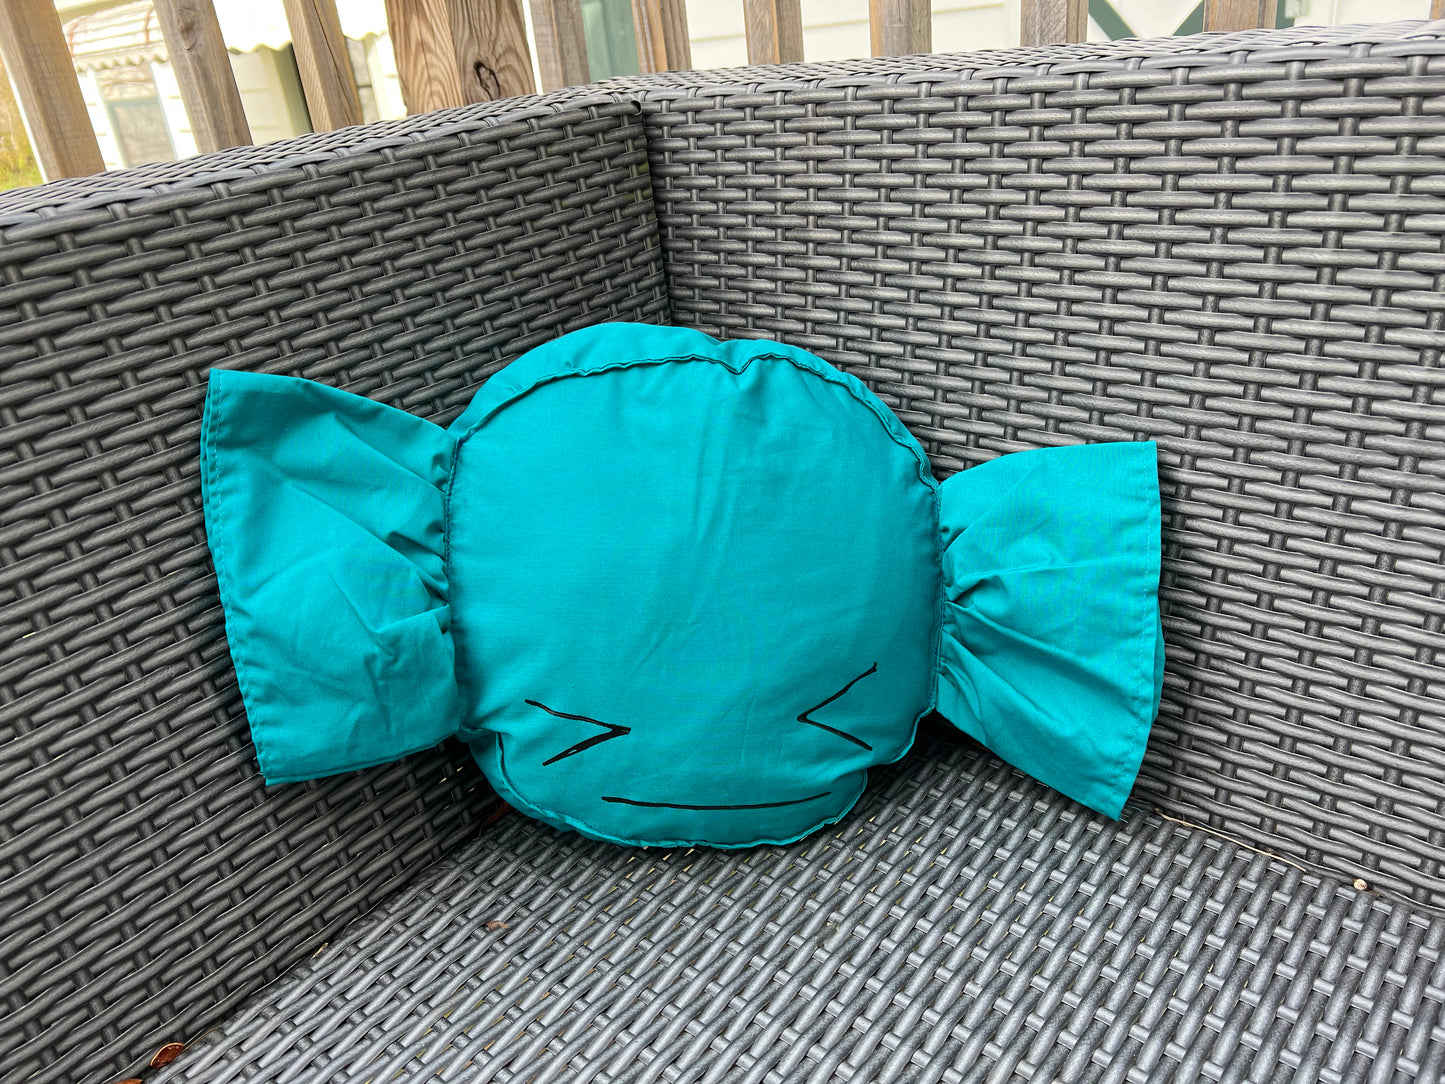 cute candy pillow, nestled in the corner of an outdoor patio chair.